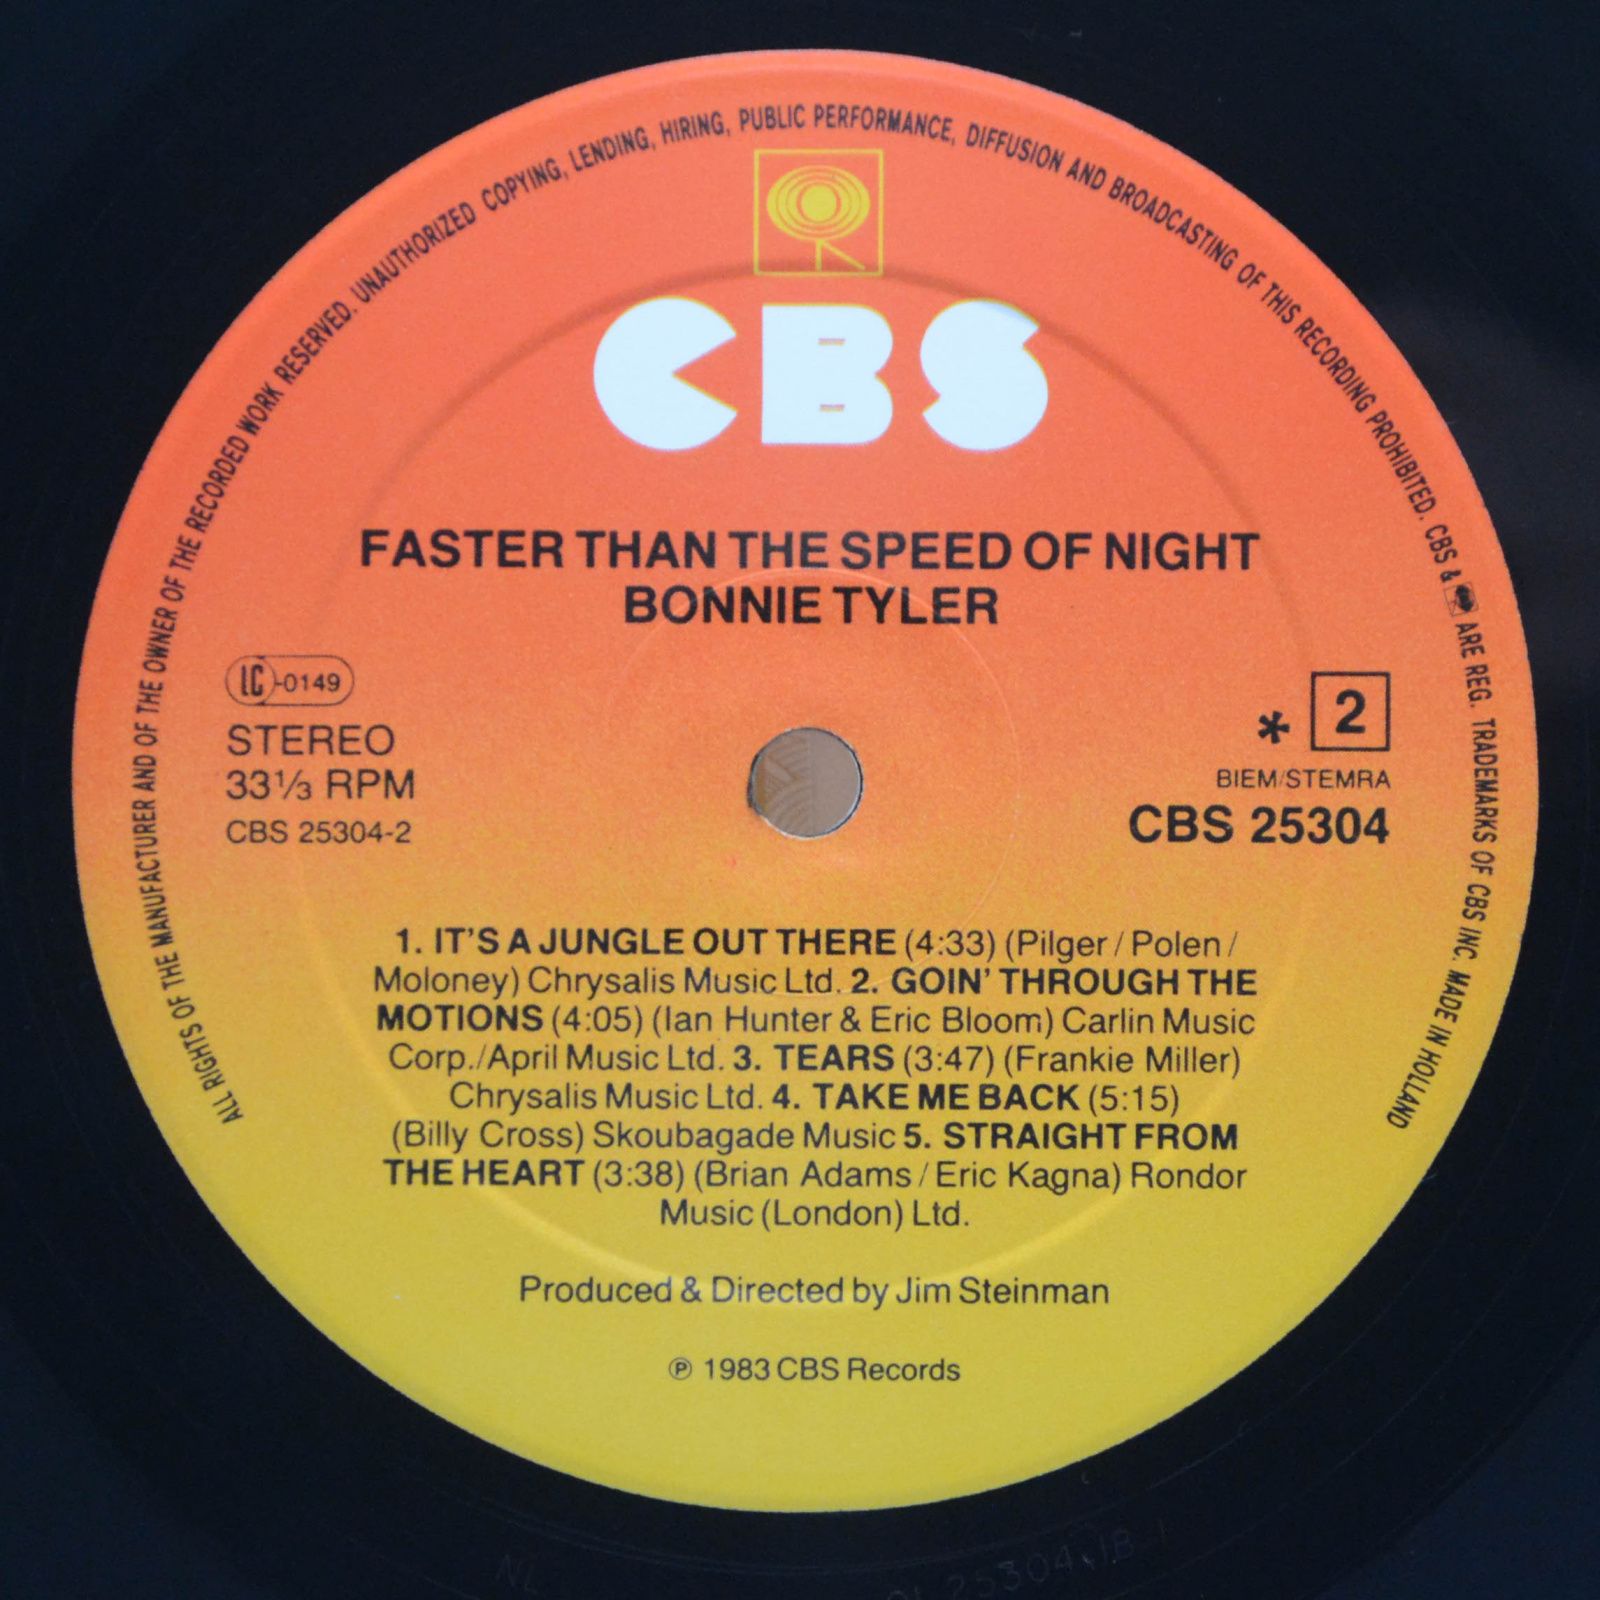 Bonnie Tyler — Faster Than The Speed Of Night, 1983